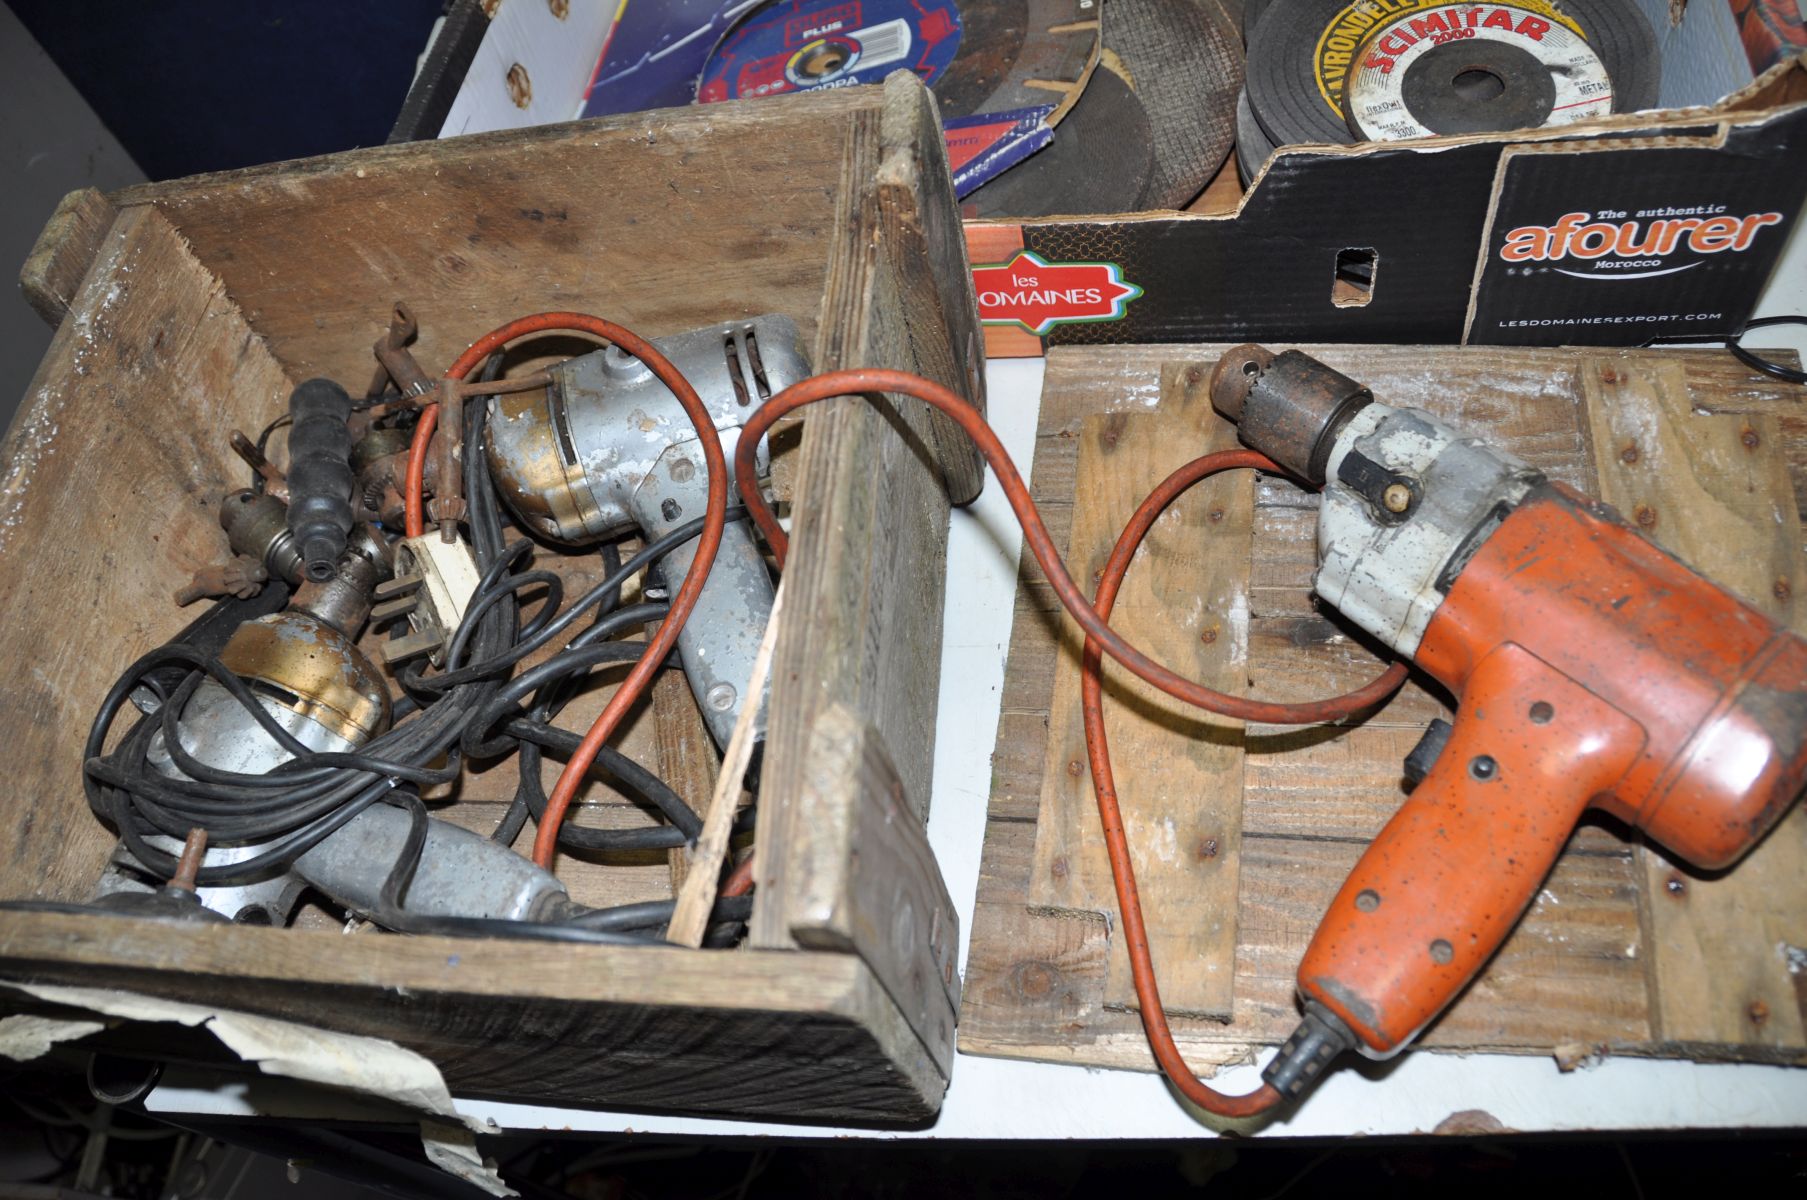 A CASED BOSCH GBH 1-18 RE PROFESSIONAL SDS DRILL (not working), four vintage Black and Decker drills - Image 2 of 4